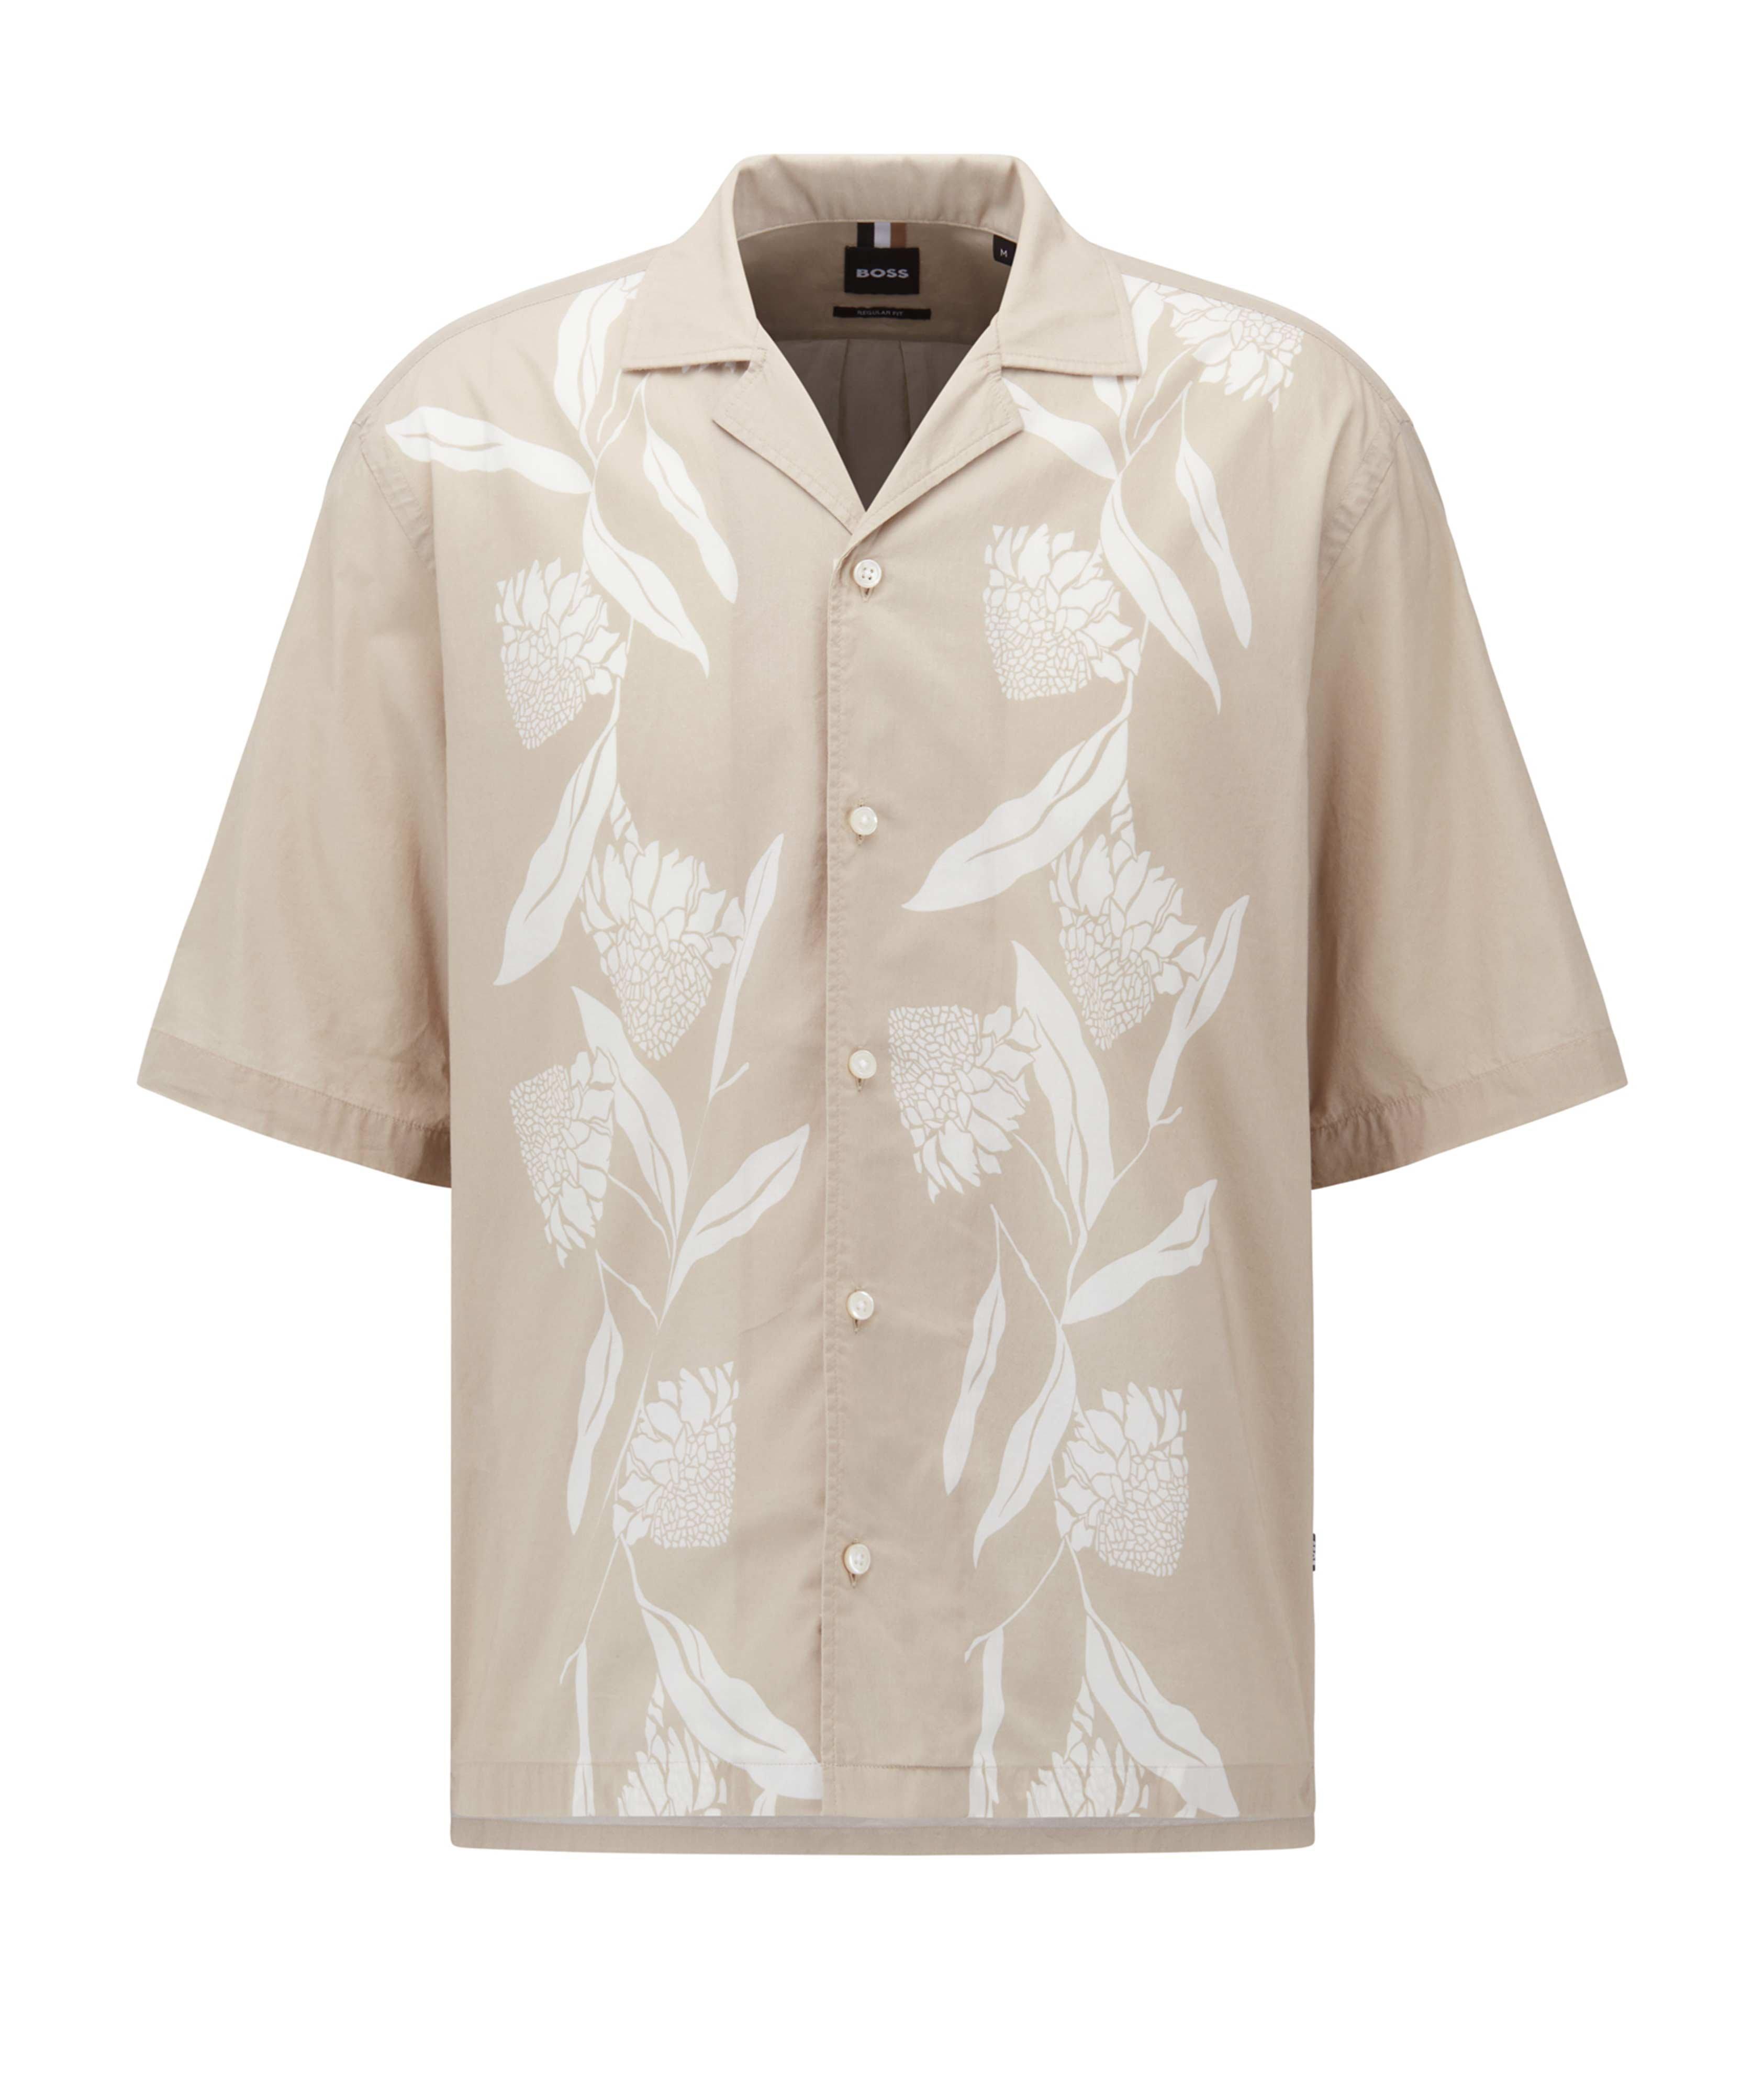 Sport Shirt In Floral-Print Cotton Voile  image 0